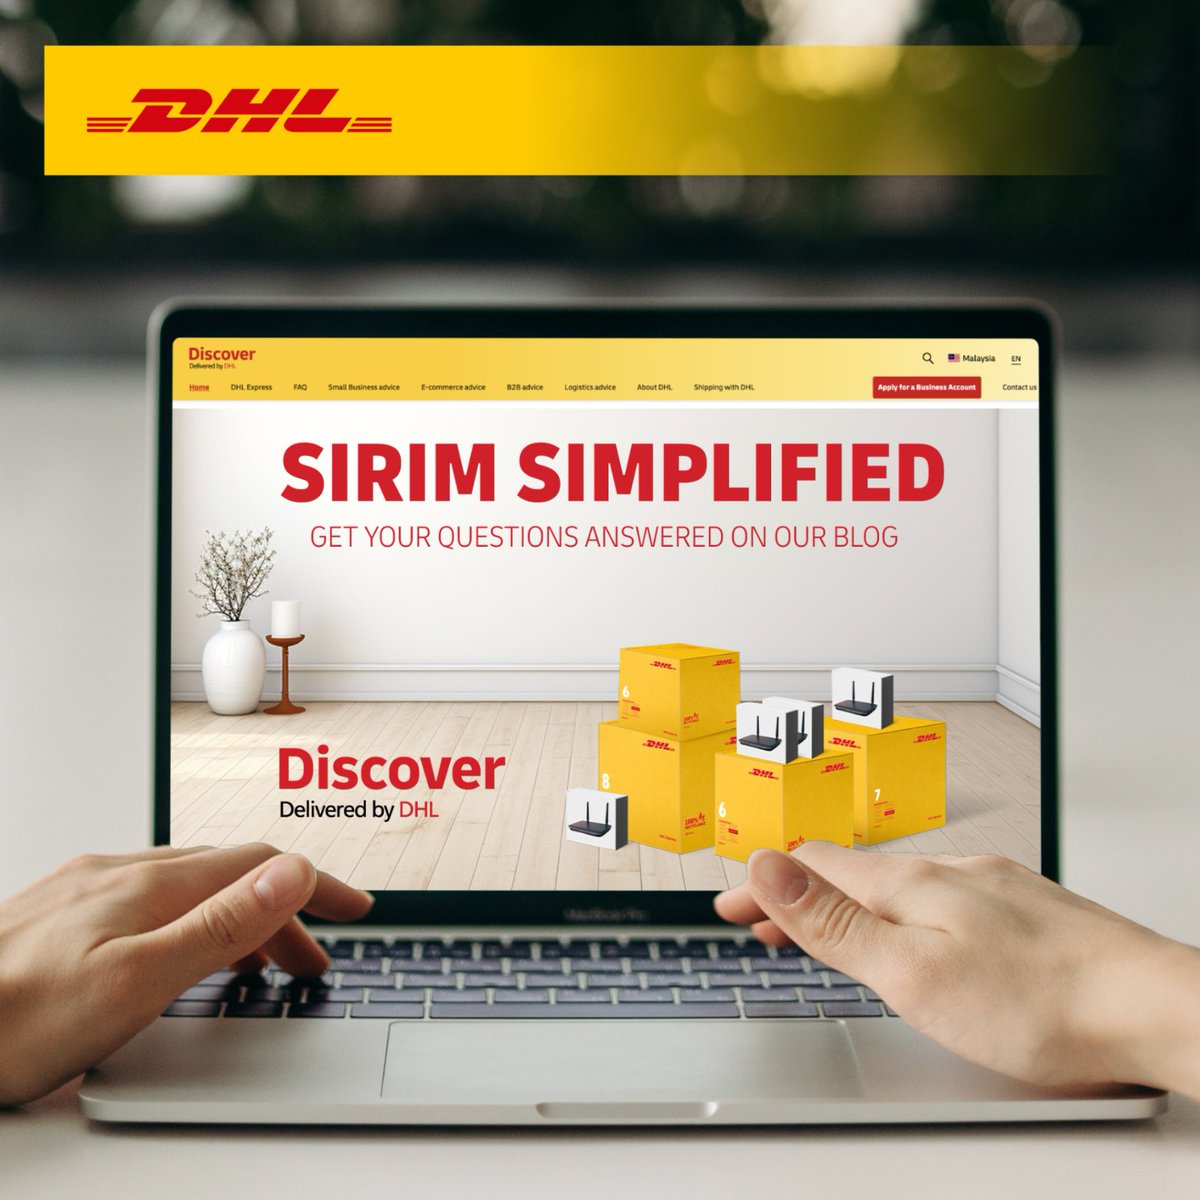 Importing a laptop into Malaysia?

You’ll need SIRIM approval for customs clearance!

We've simplified everything with easy-to-follow steps and ✨ answers to all your questions about the application process and payment: dhl.com/discover/en-my…

#dhlexpress #malaysia #import